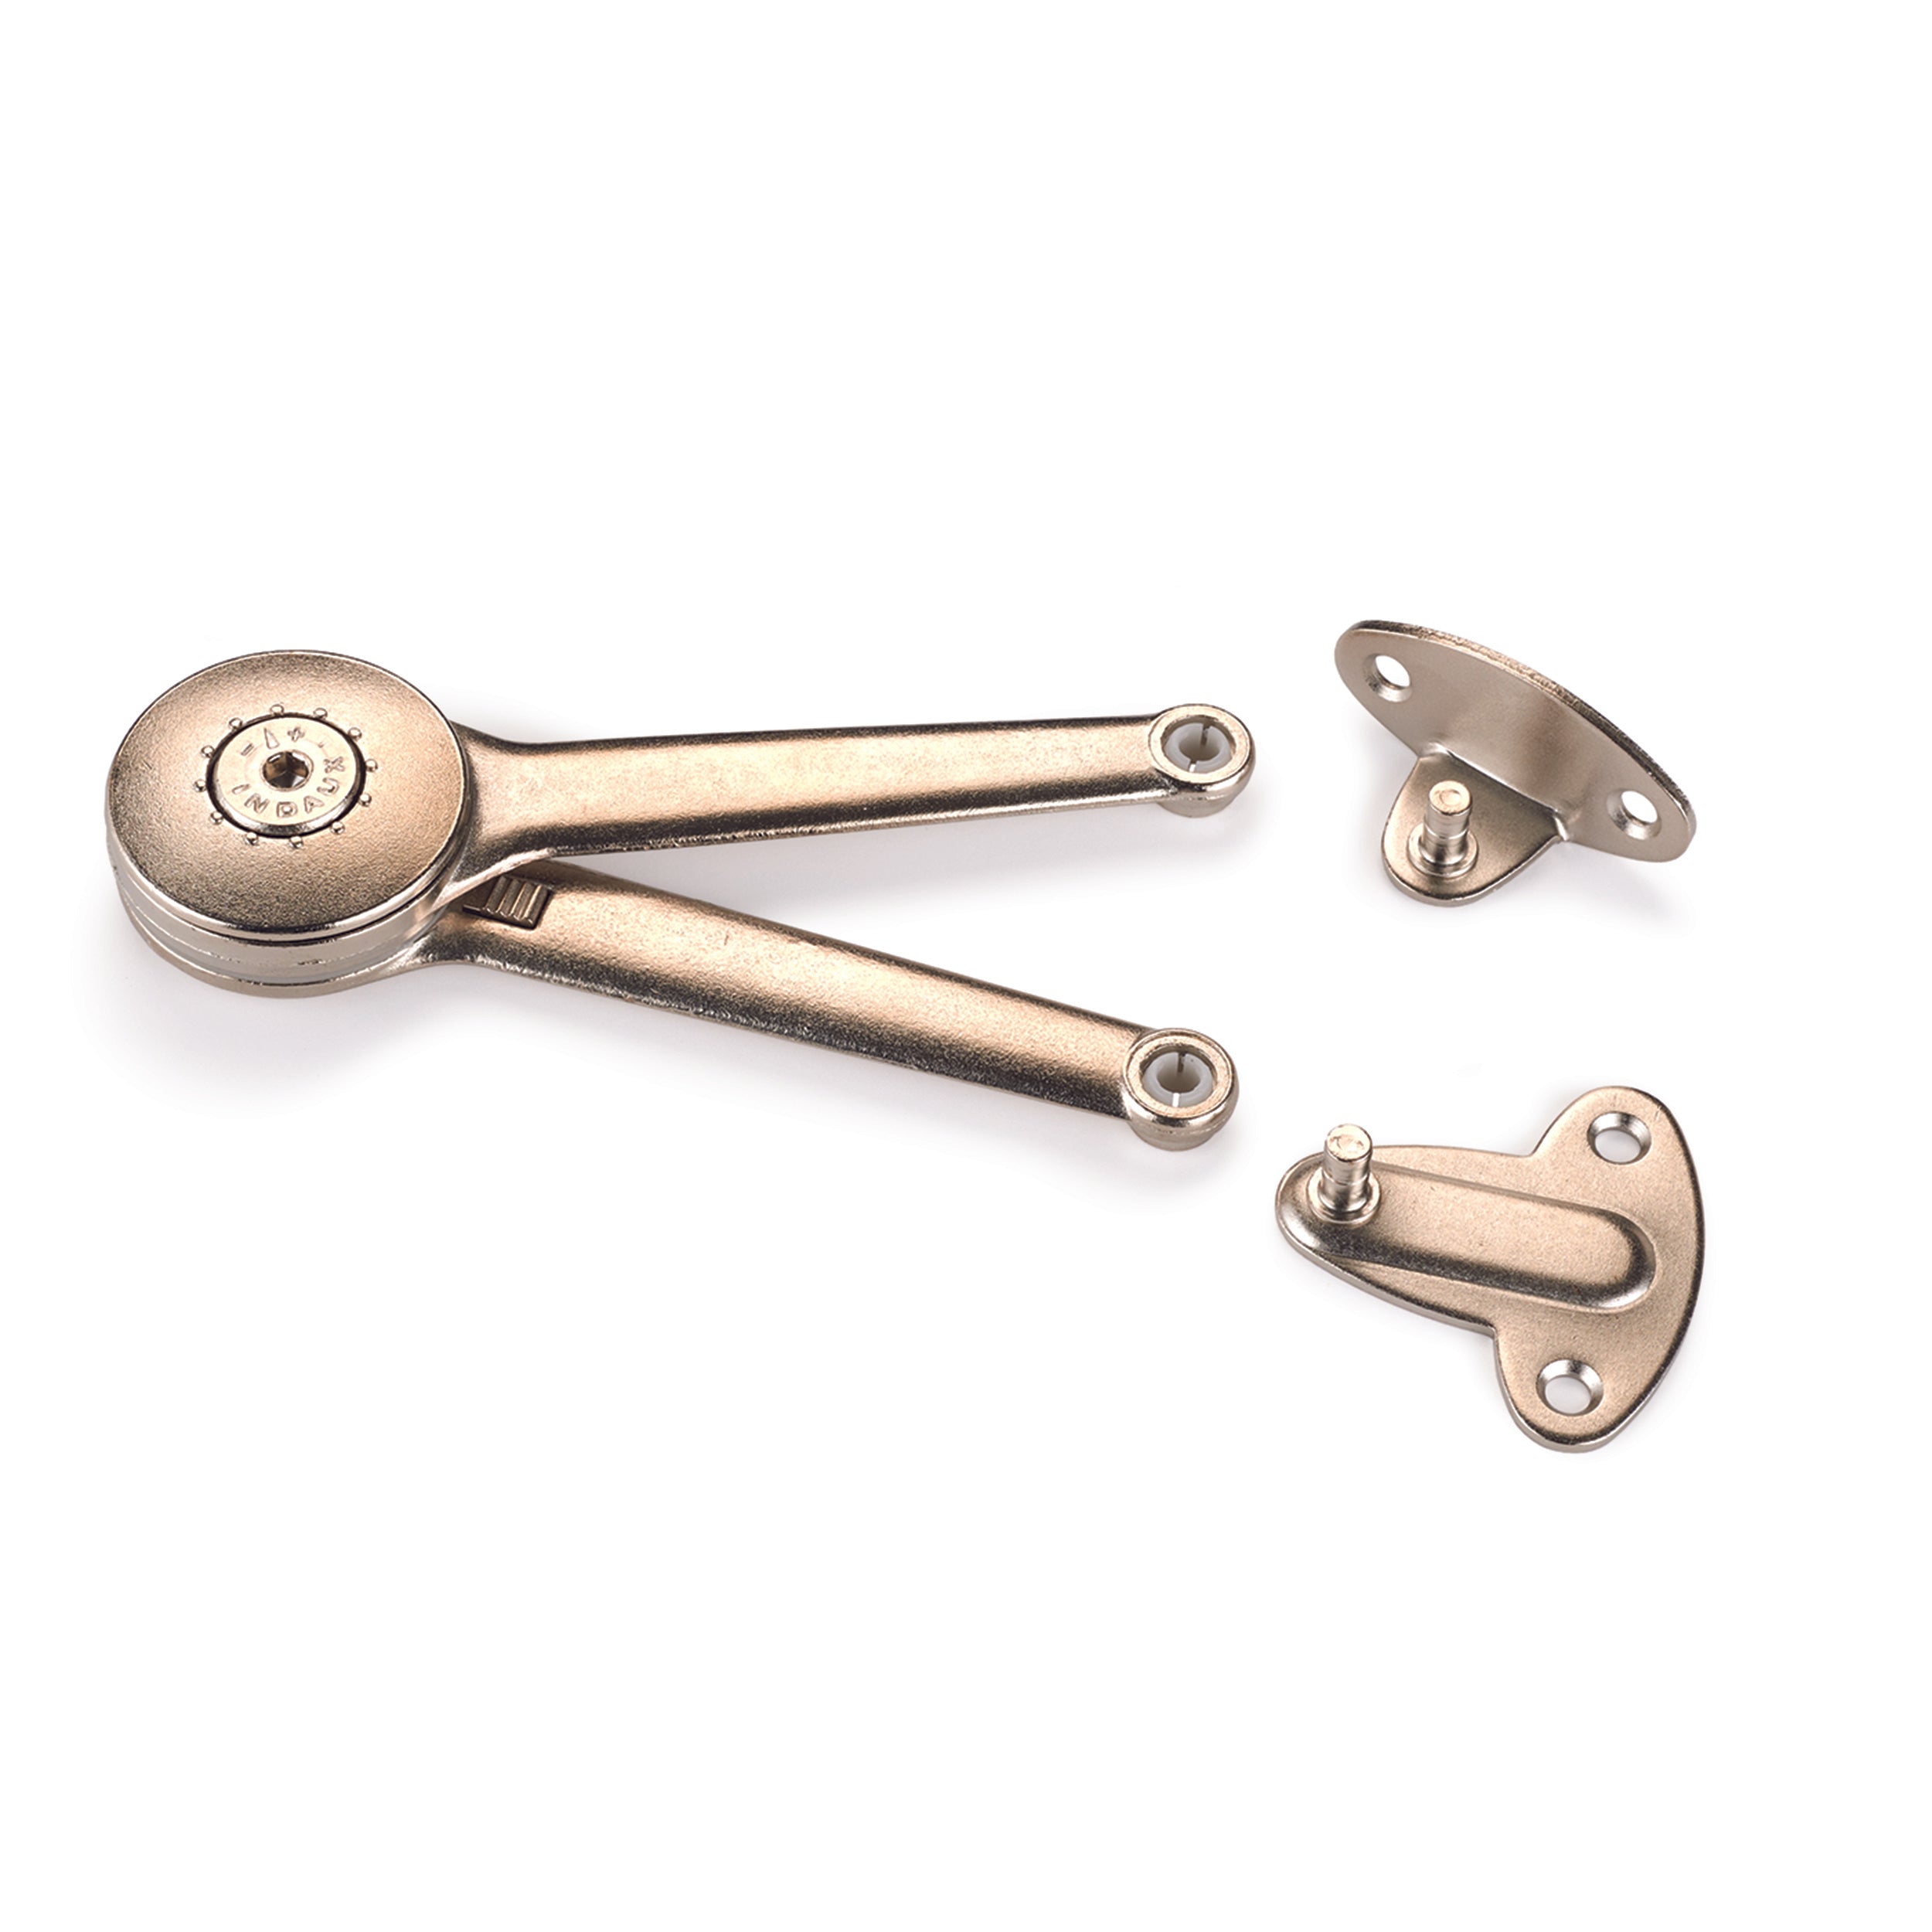 Brass Lifting Handle for Boxes & Chests - Paxton Hardware